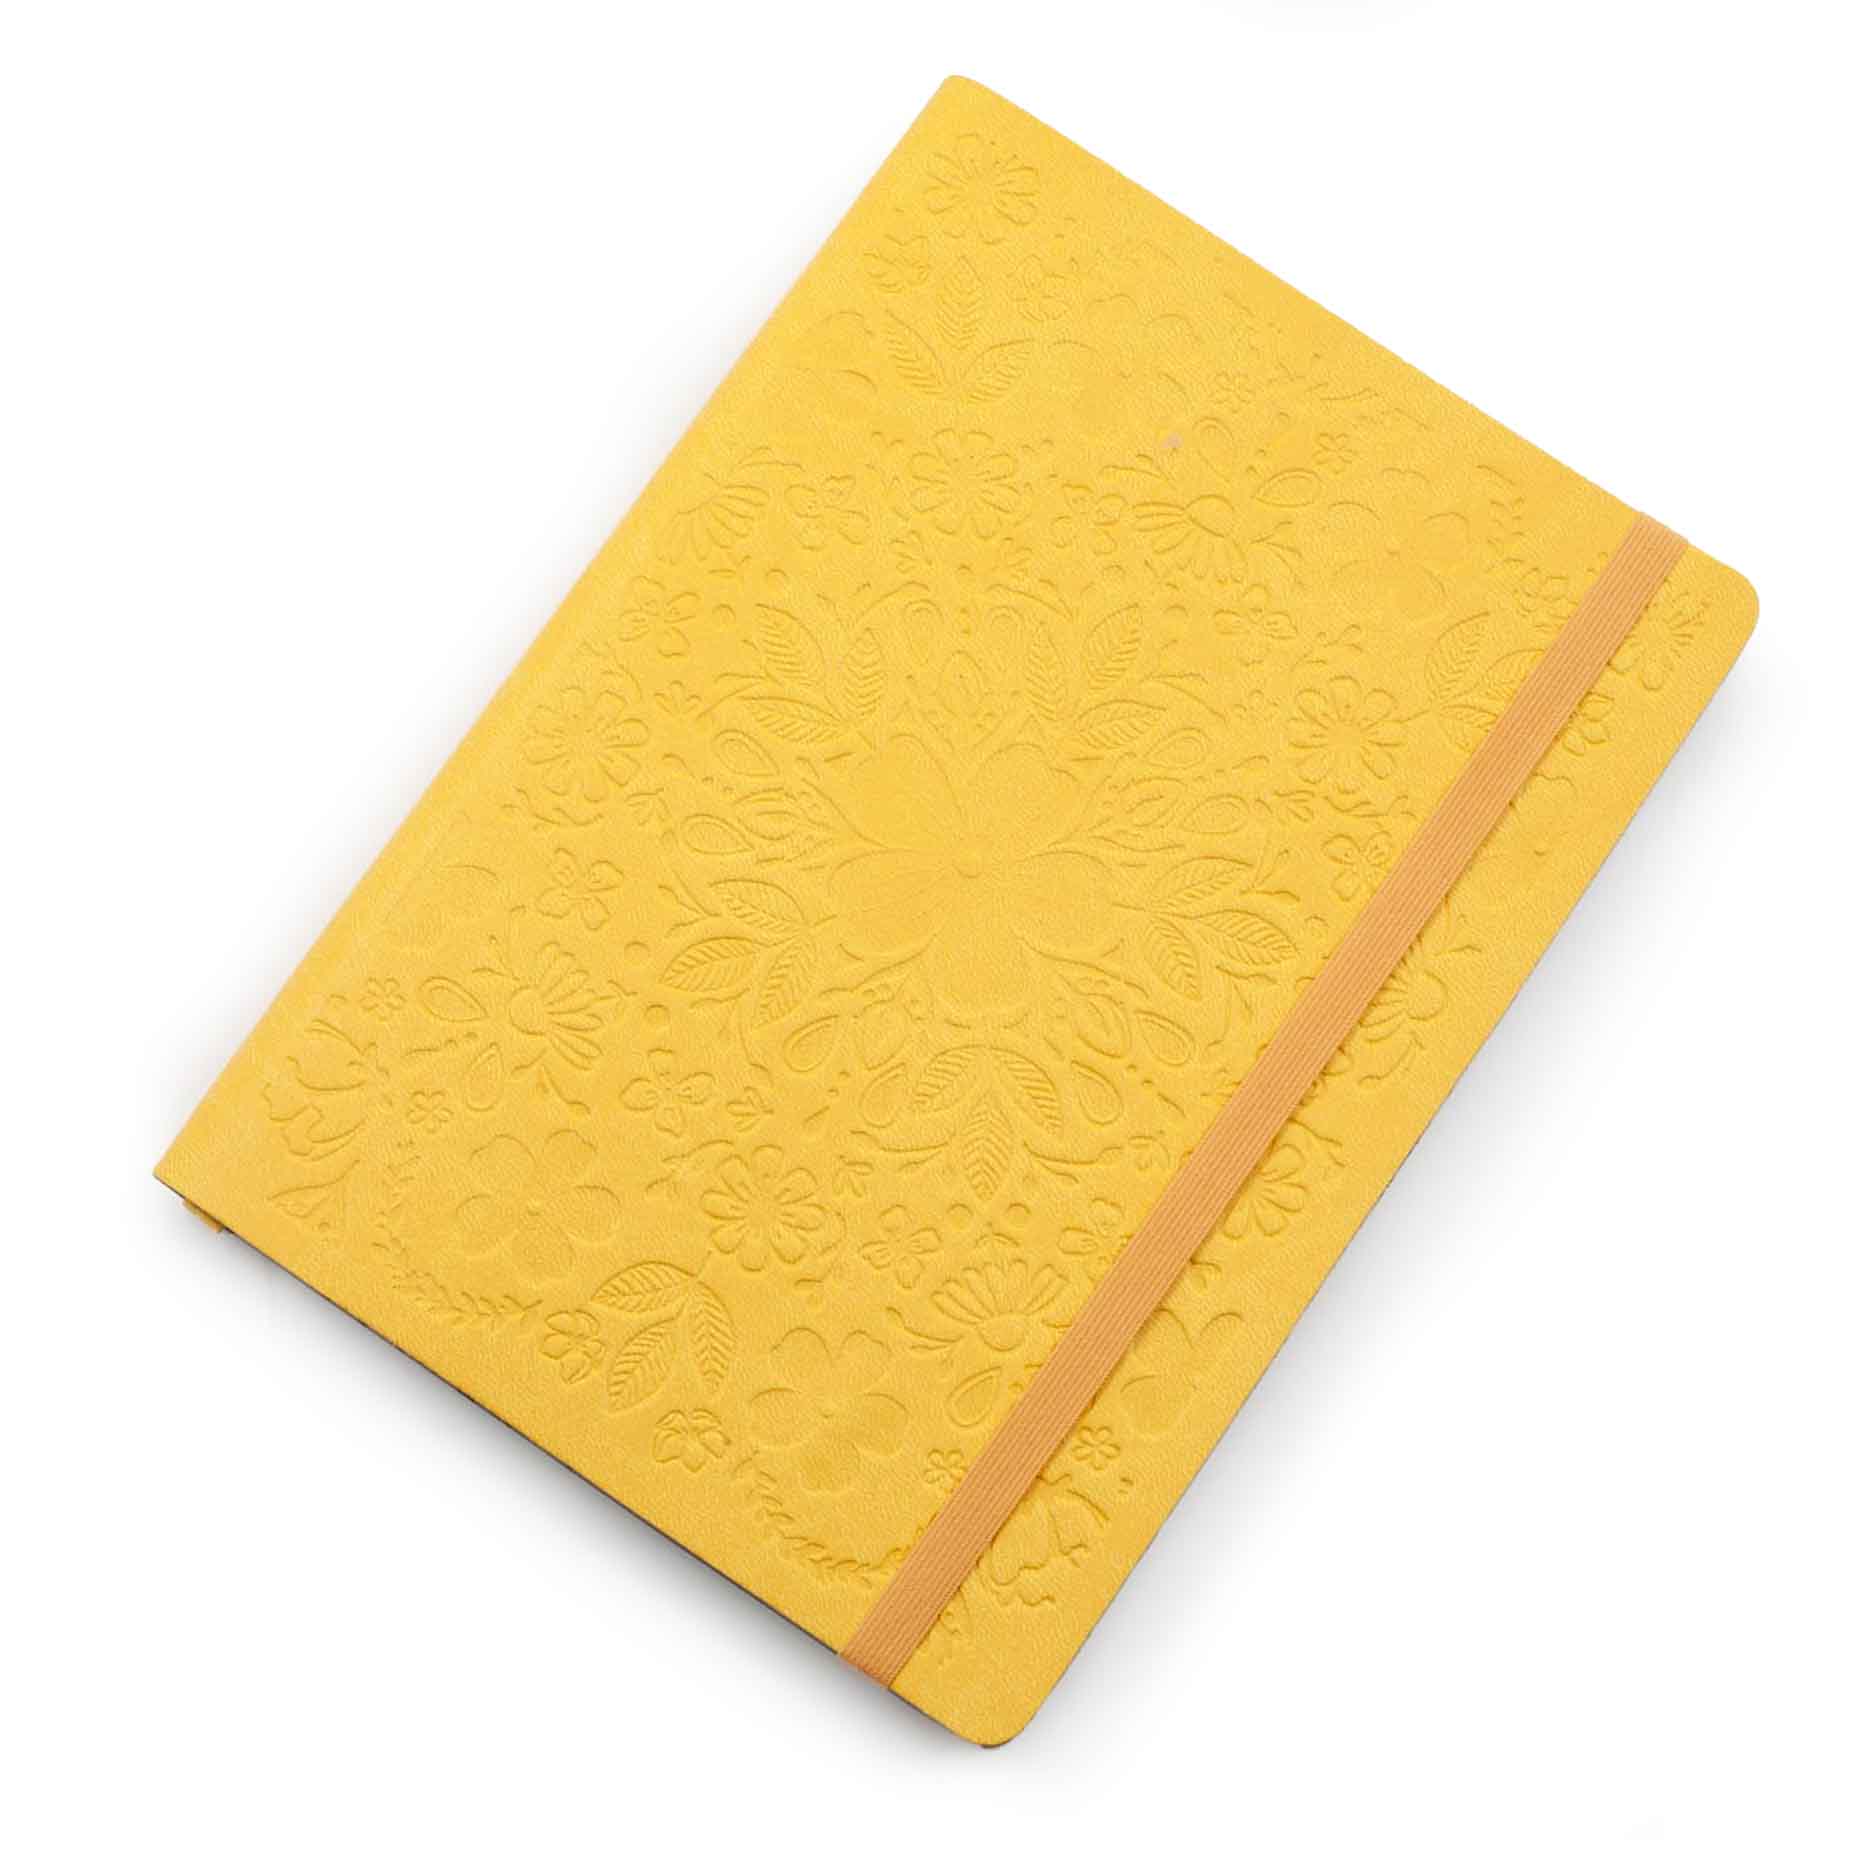 Image shows a front top view of a yellow Flexi Premium journal